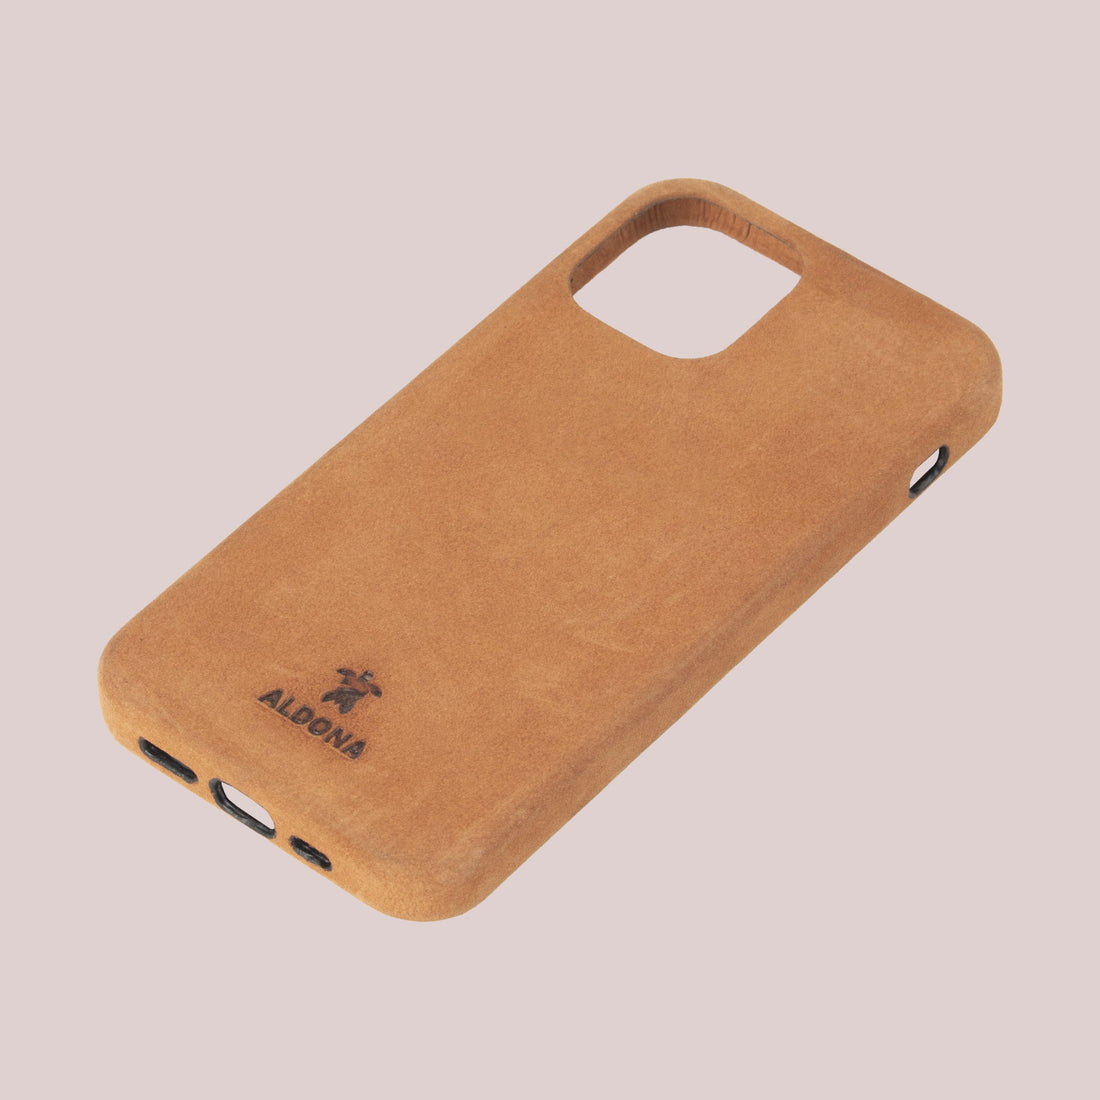 Kalon Case for iPhone 13 Pro Max with MagSafe Compatibility - Cognac